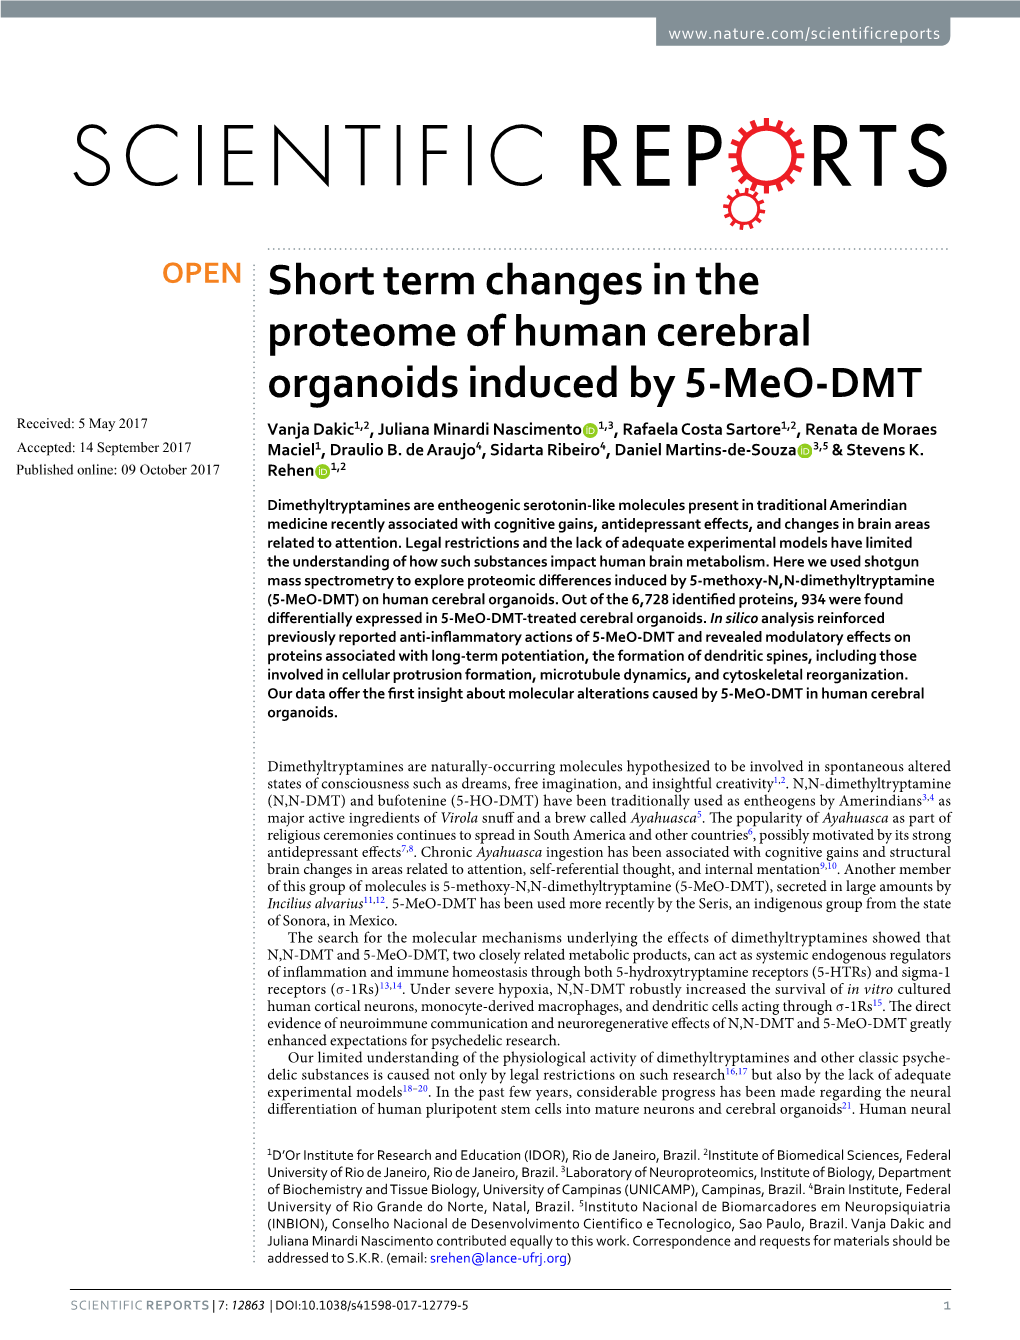 Short Term Changes in the Proteome of Human Cerebral Organoids Induced